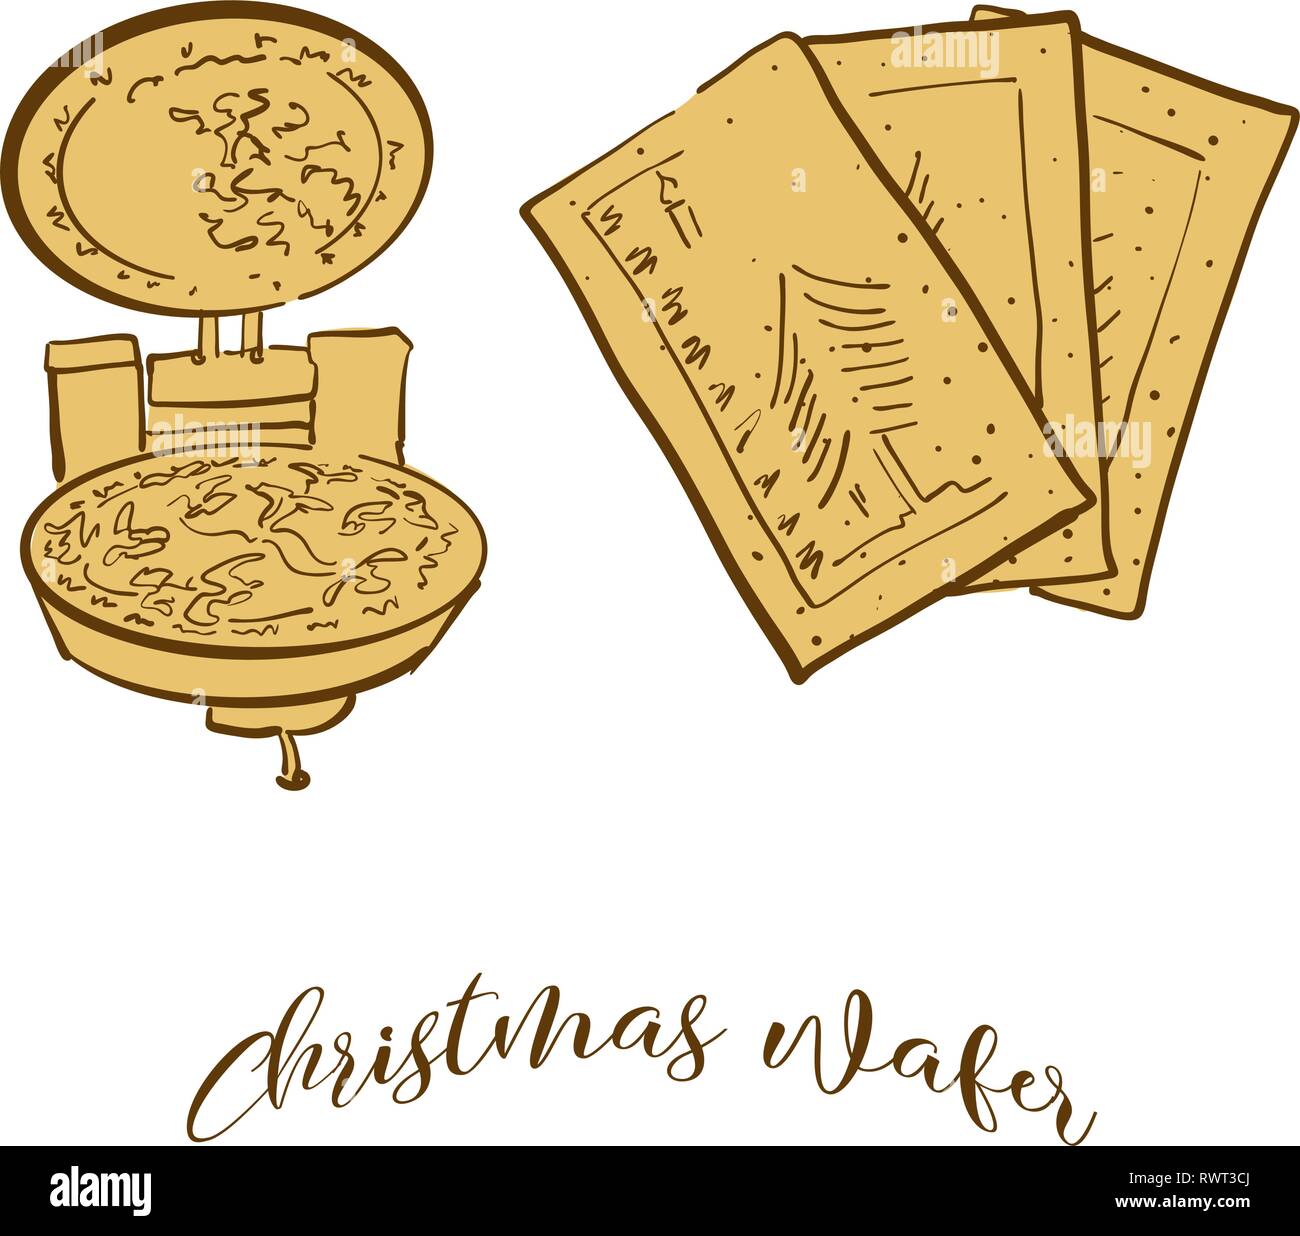 Colored sketches of Christmas wafer bread. Vector drawing of Crispy bread food, usually known in Eastern Europe. Colored Bread illustration series. Stock Vector